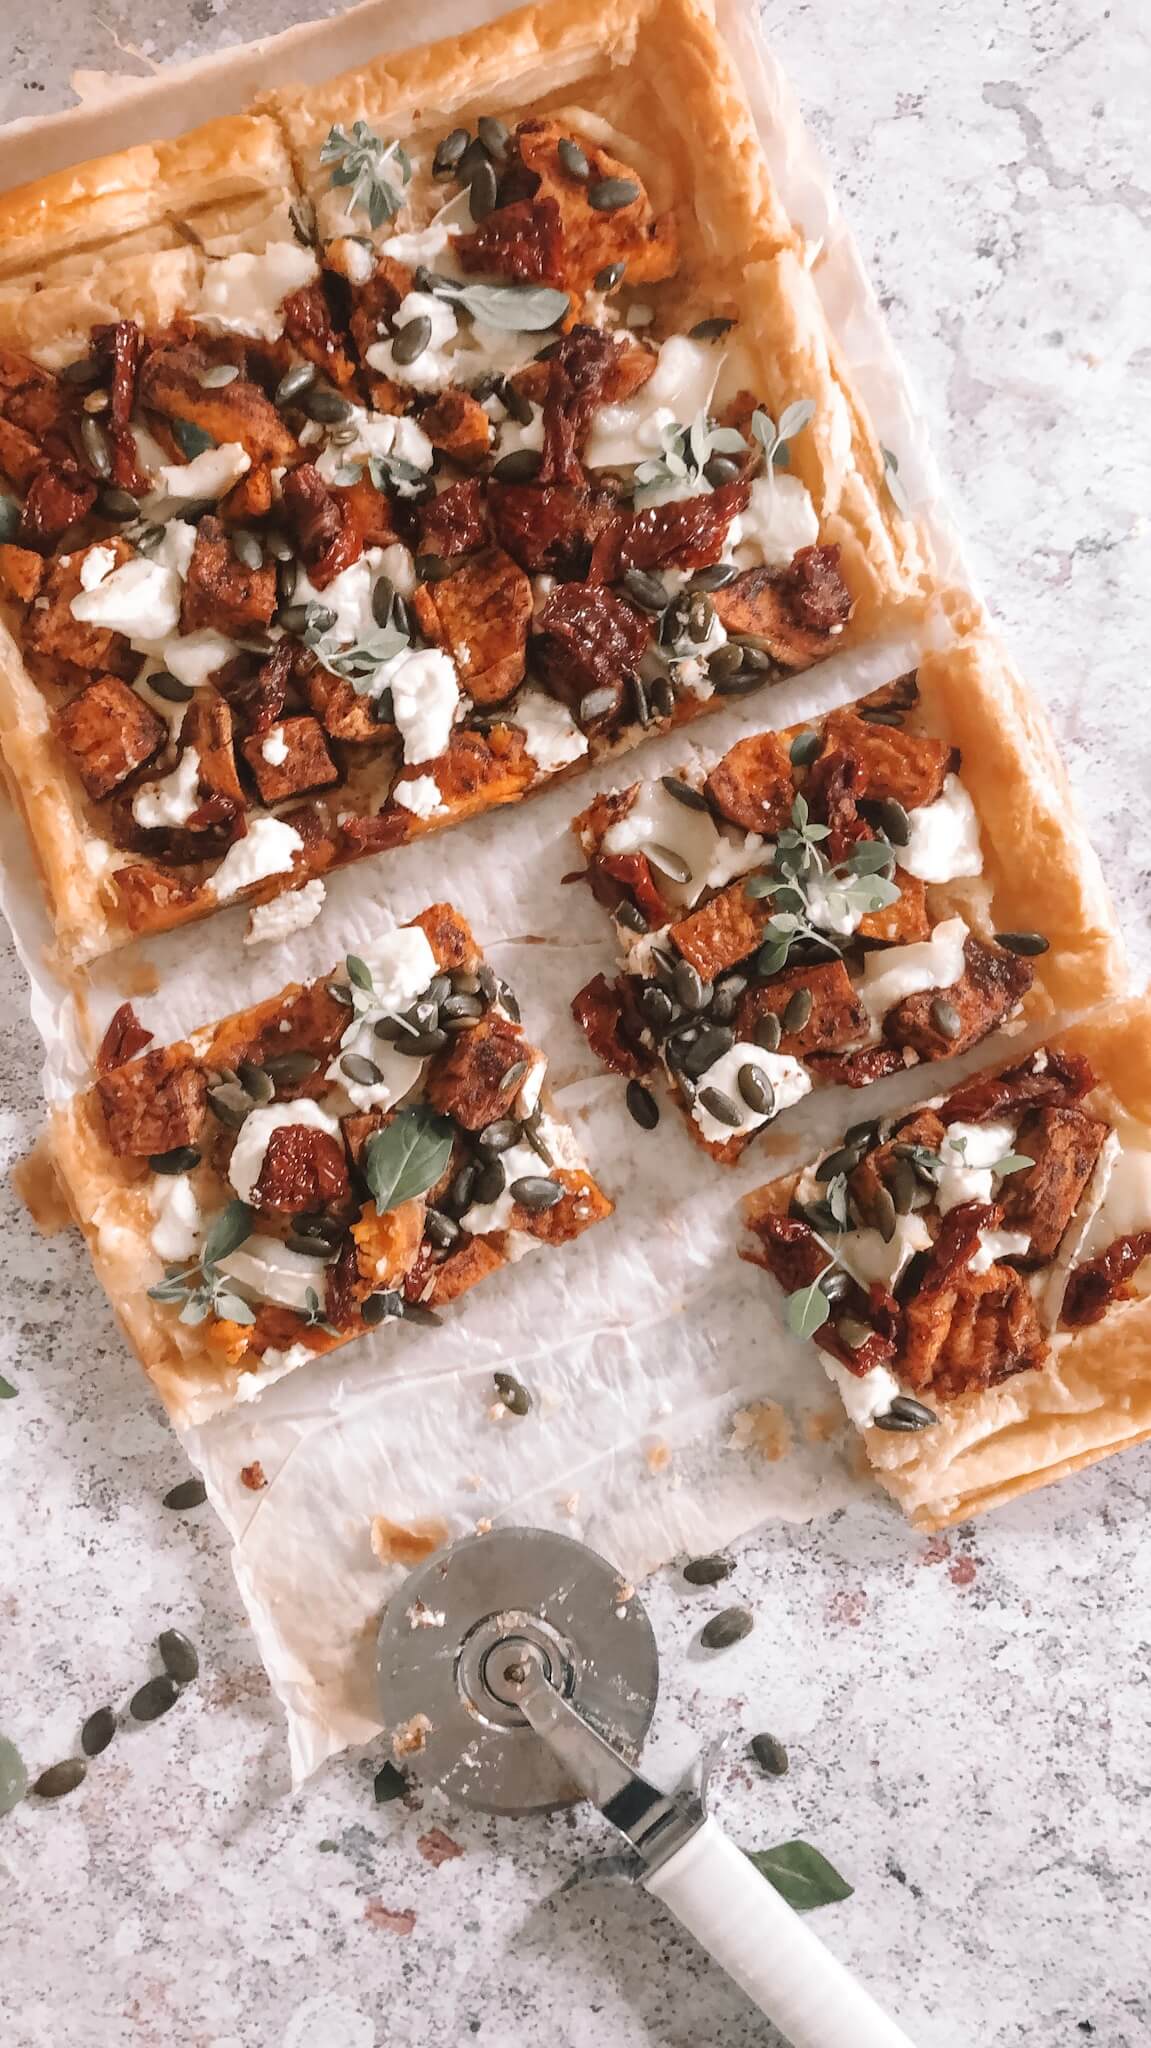 SPICED SWEET POTATO AND GOATS CHEESE TART